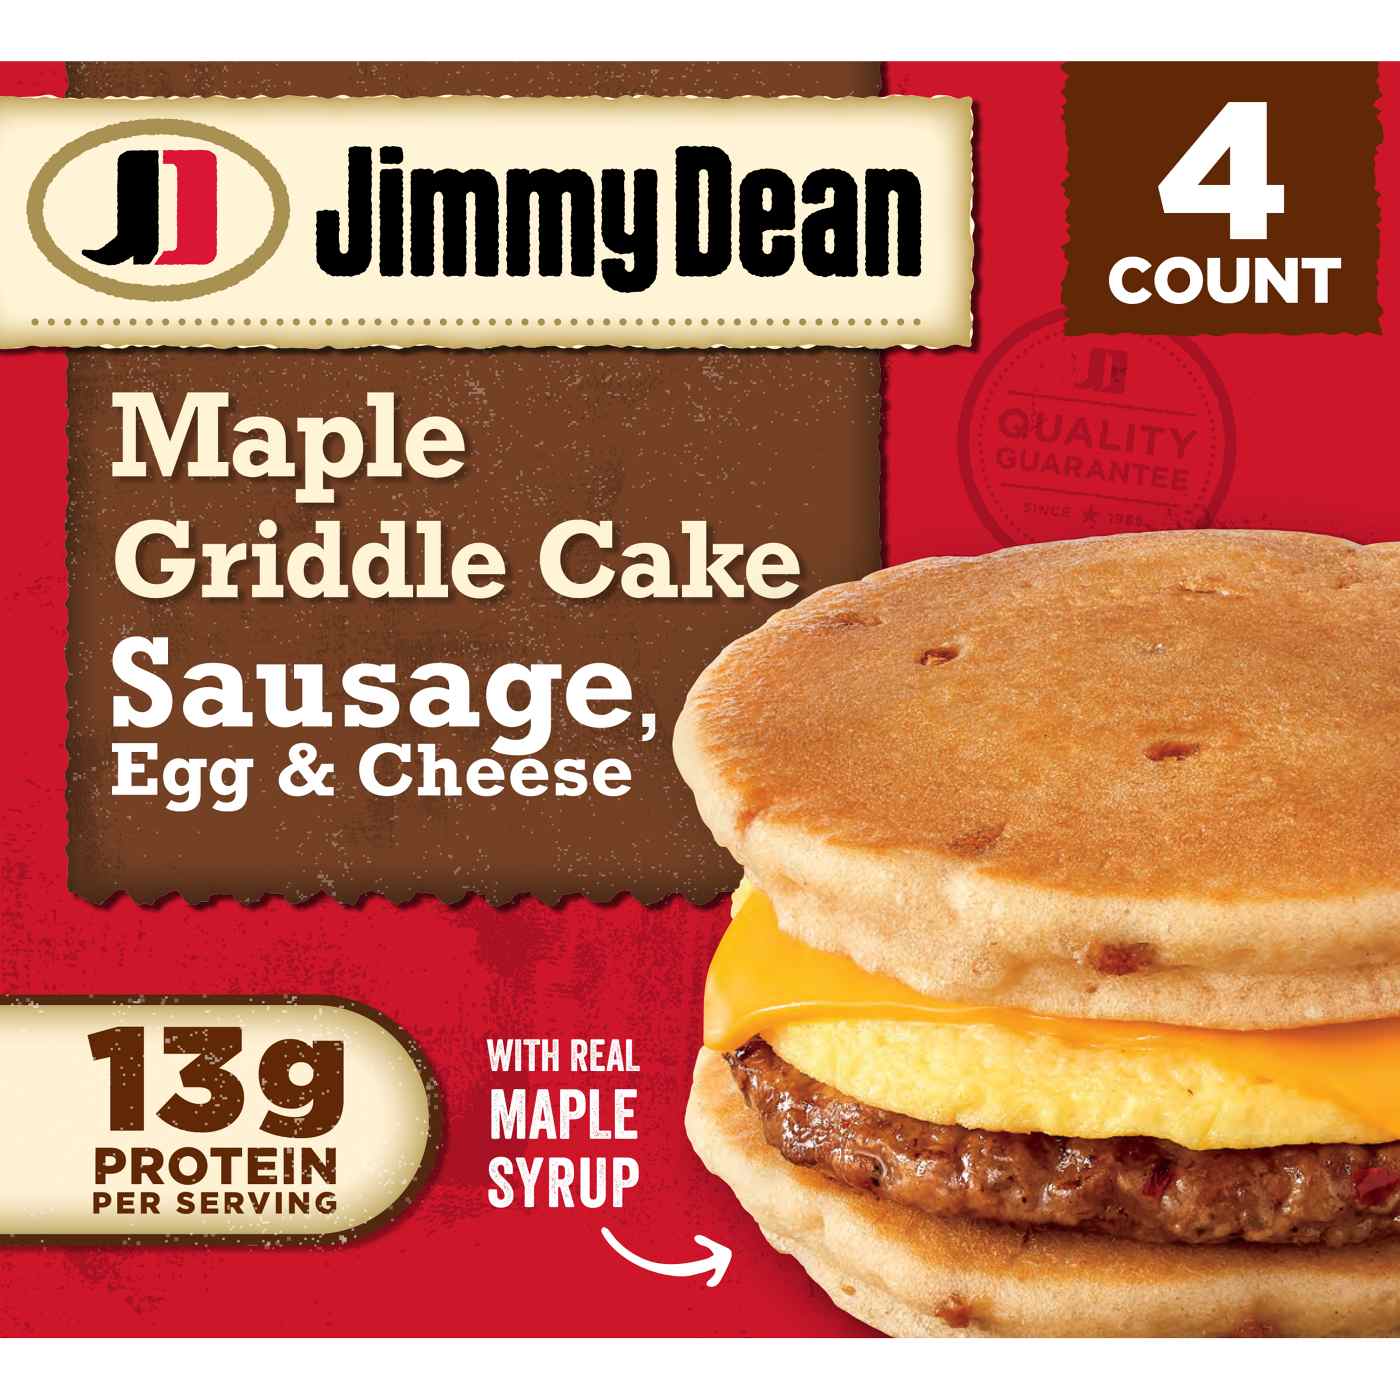 Jimmy Dean Sausage Egg & Cheese Maple Griddle Cakes; image 1 of 2